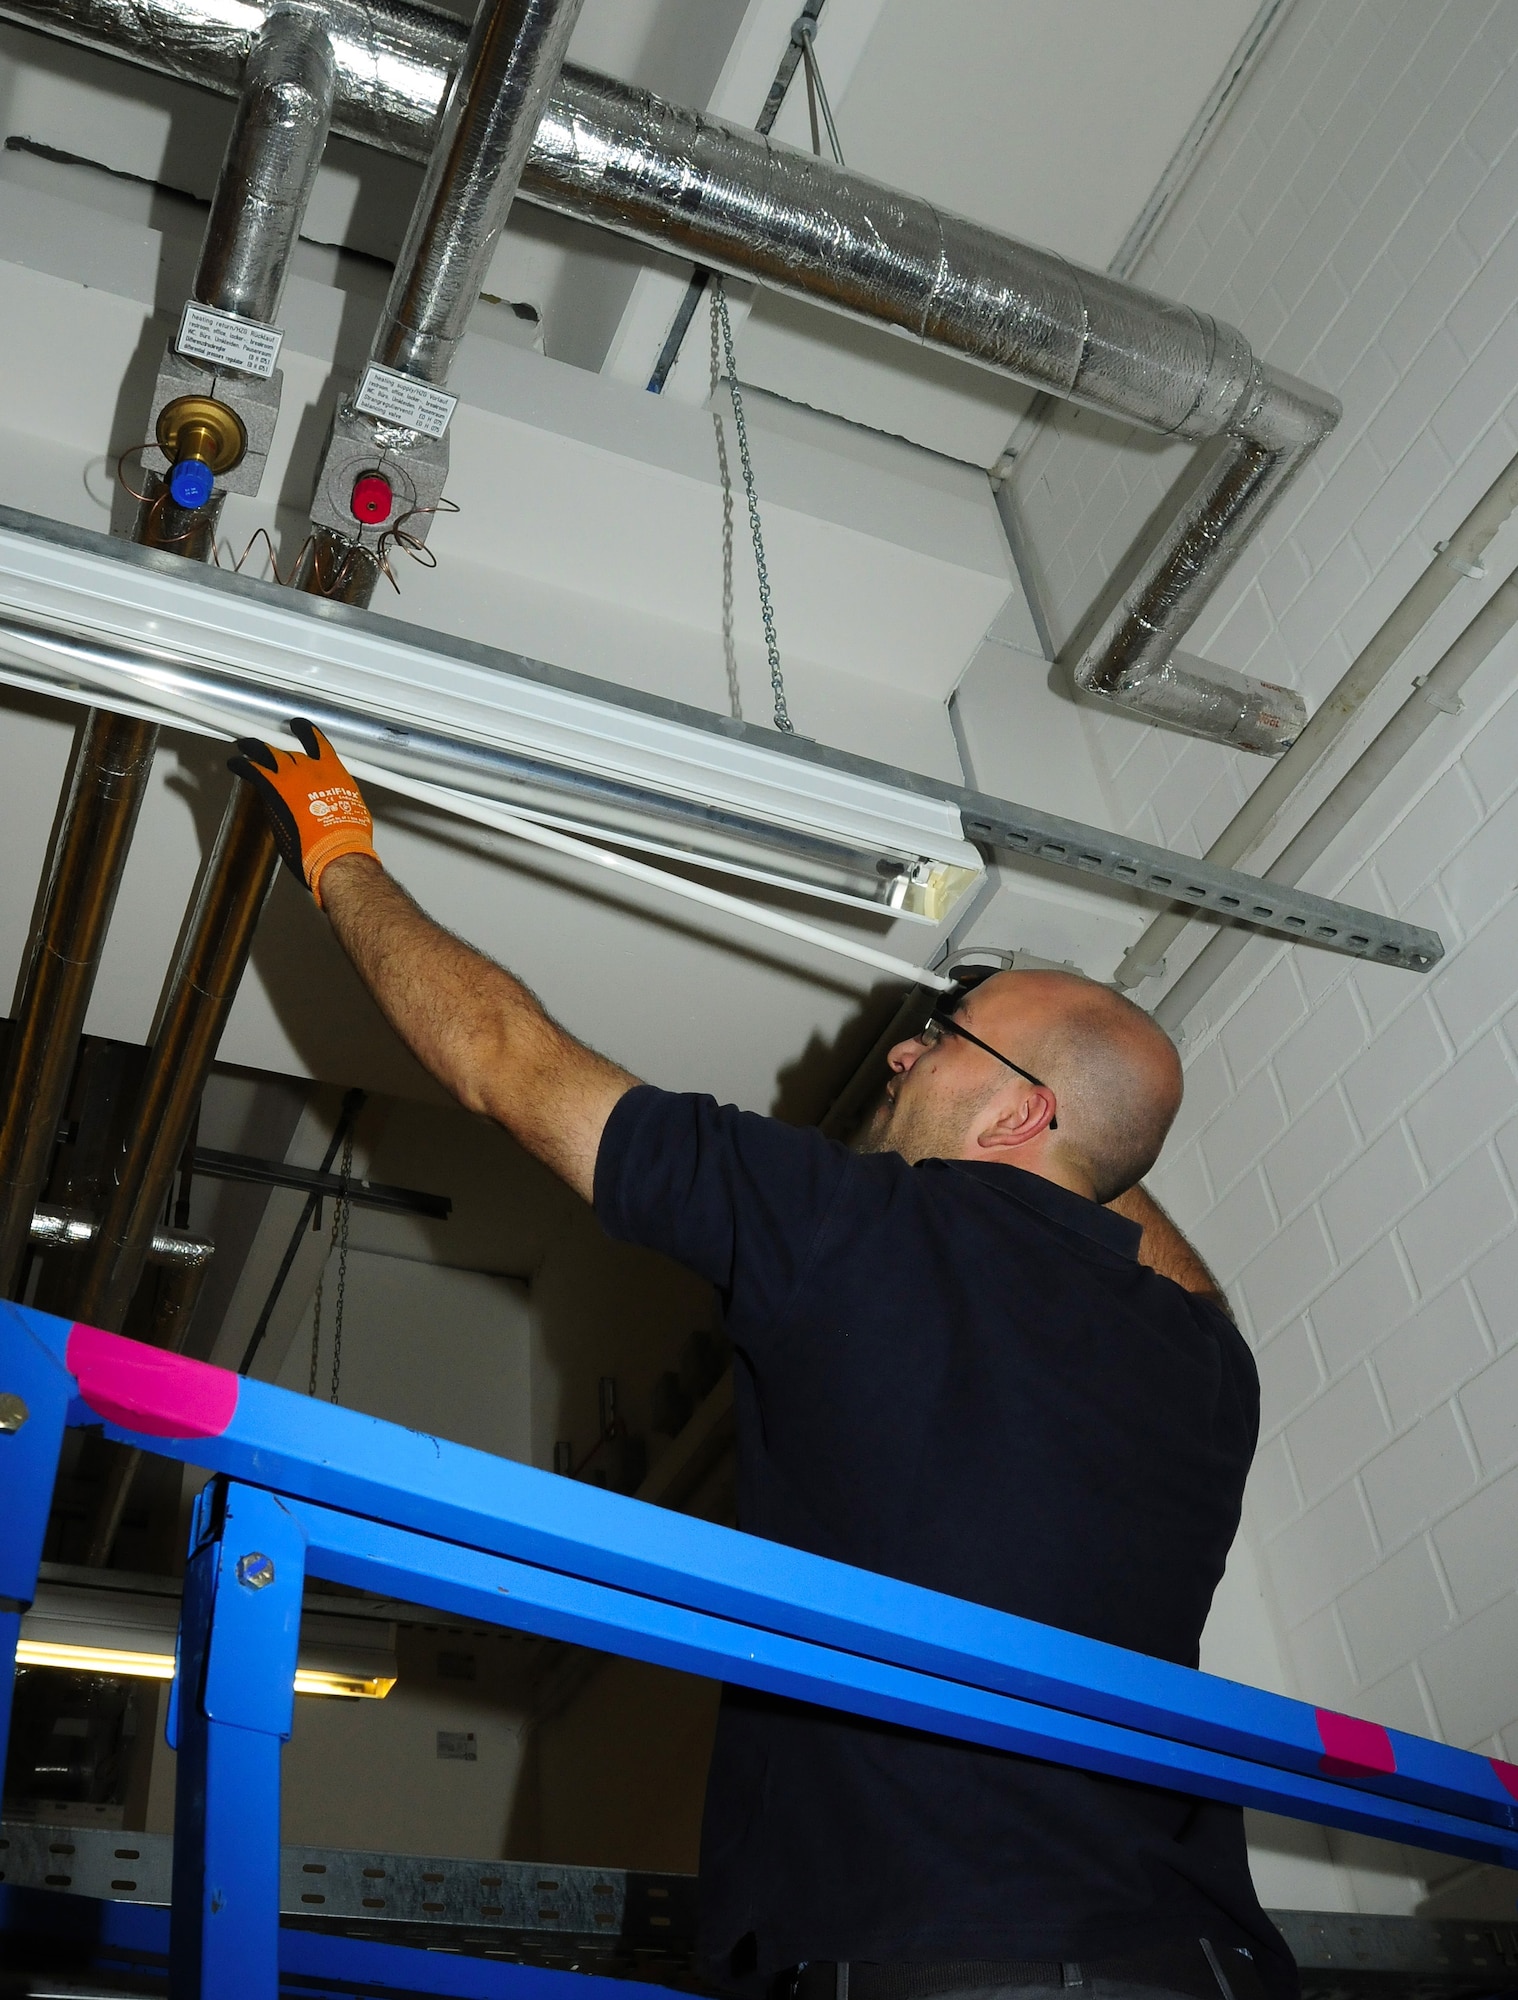 Jonathan Lewandowski, Kaiserslautern Military Community Center heating ventilation and air conditioning technician, helps conserve energy by partially and fully removing light bulbs from key fixtures throughout the facility at Ramstein Air Base, Germany, August 2, 2011. The KMCC recently started "Phase II" of a cost-saving energy initiative that will save at least $15 million over the
course of the building's life. (U.S. Air Force photo by Airman 1st Class Desiree Esposito)